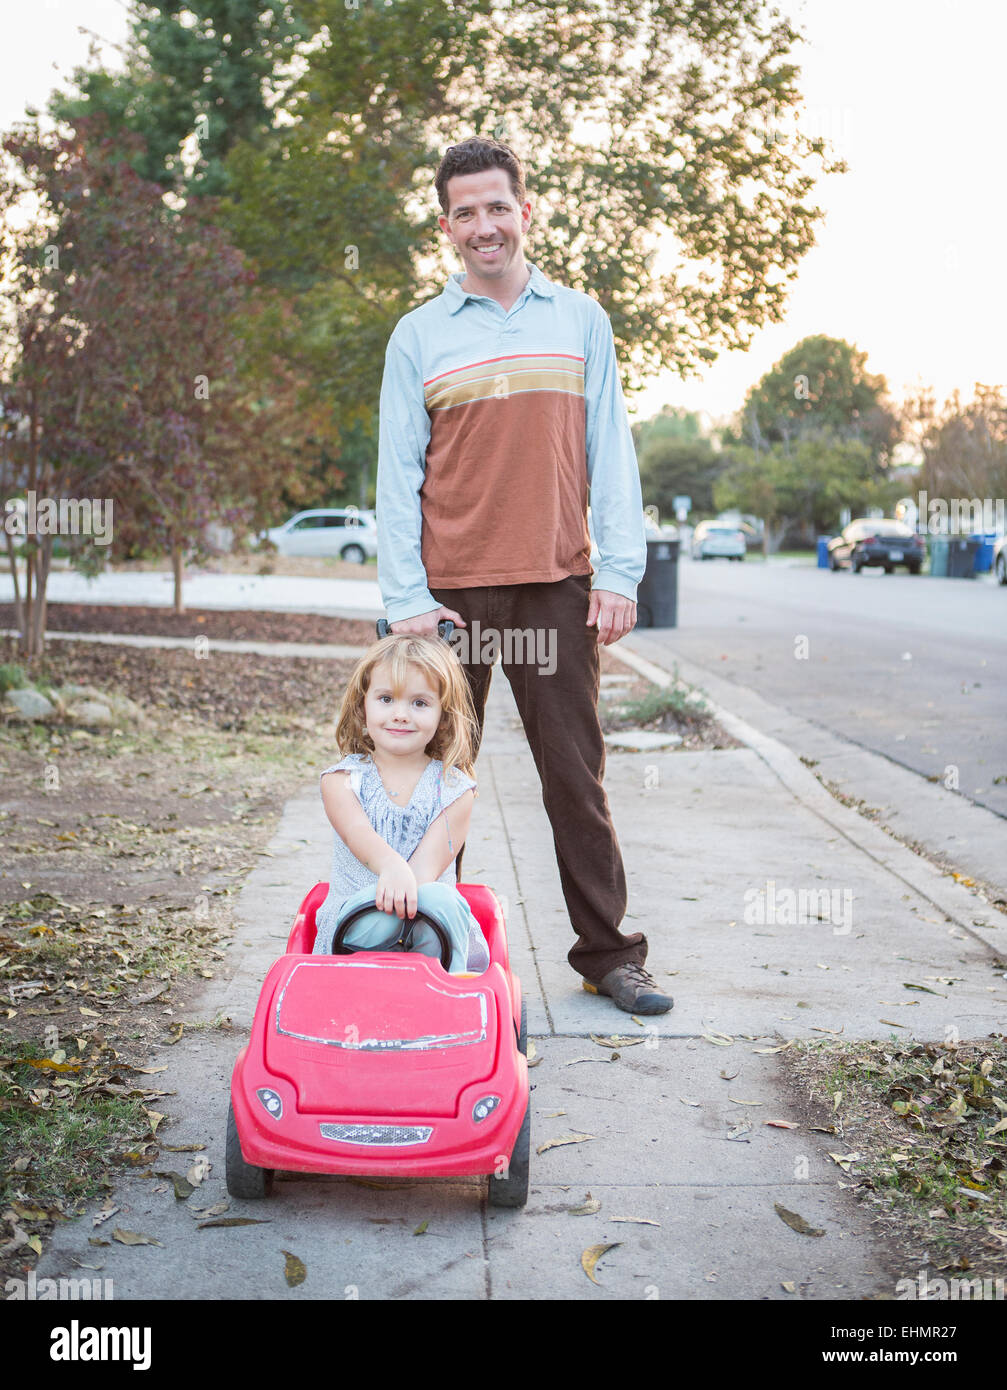 Caucasian father pushing daughter in toy car Stock Photo